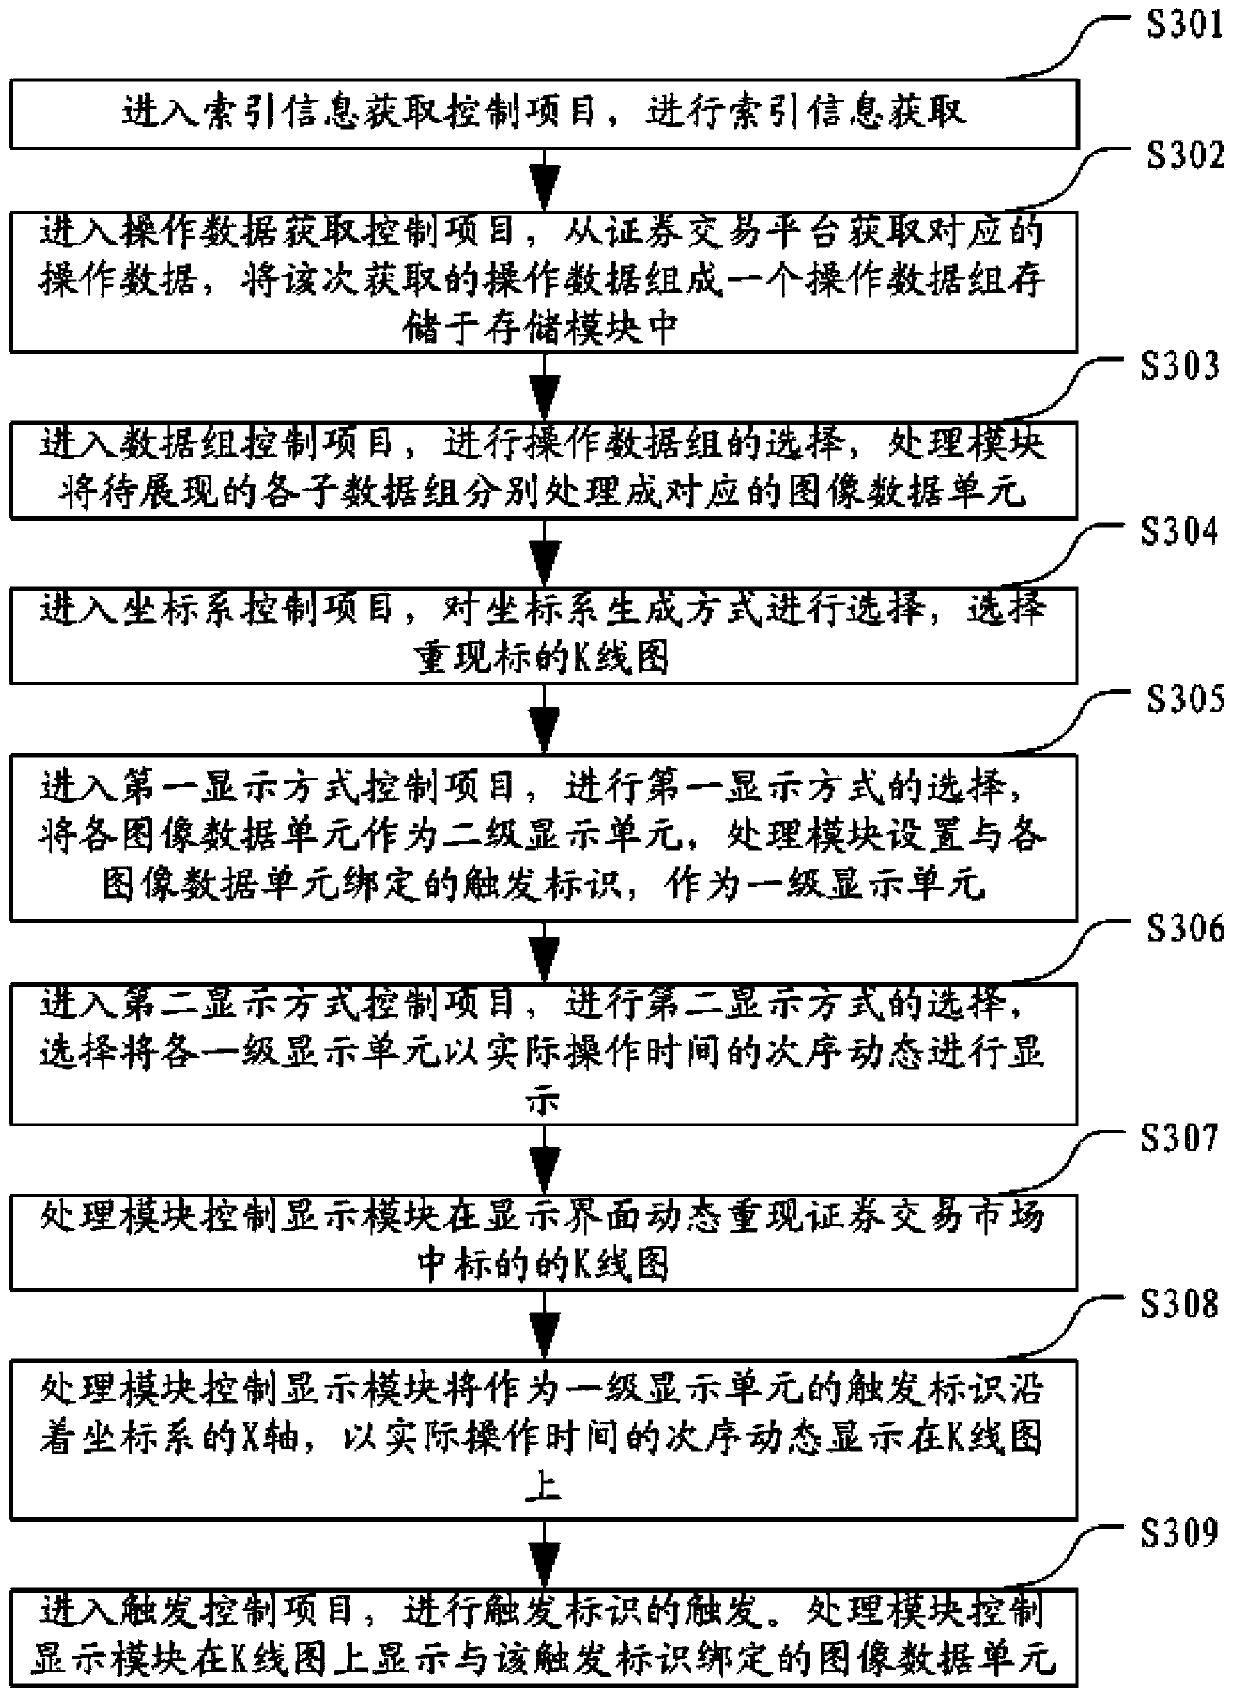 Device and method for displaying financial transaction operation data through dynamic images